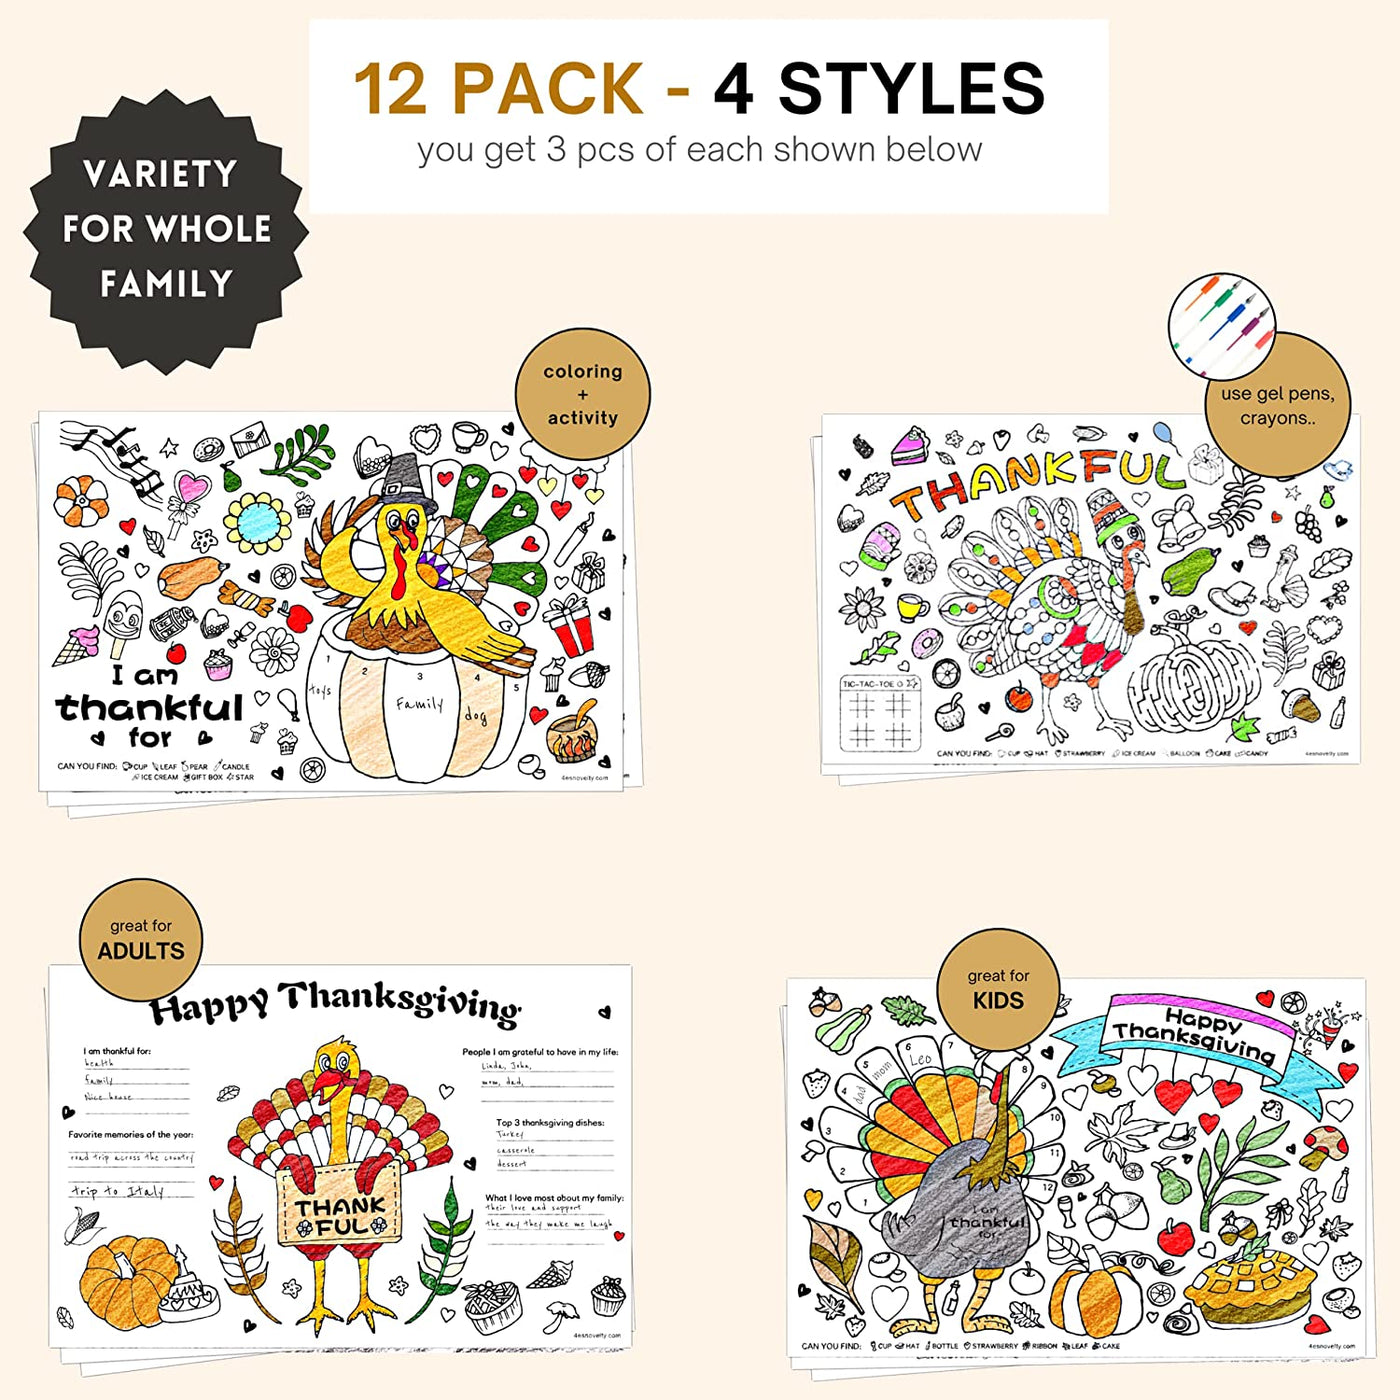 4E's Novelty Thanksgiving Placemat Activity Kids Coloring Placemats for Kids & Adults, 11x17 Paper Disposable Placemats Crafts Bulk, 12 Pack, Thankful Activities for Family Dinner Table